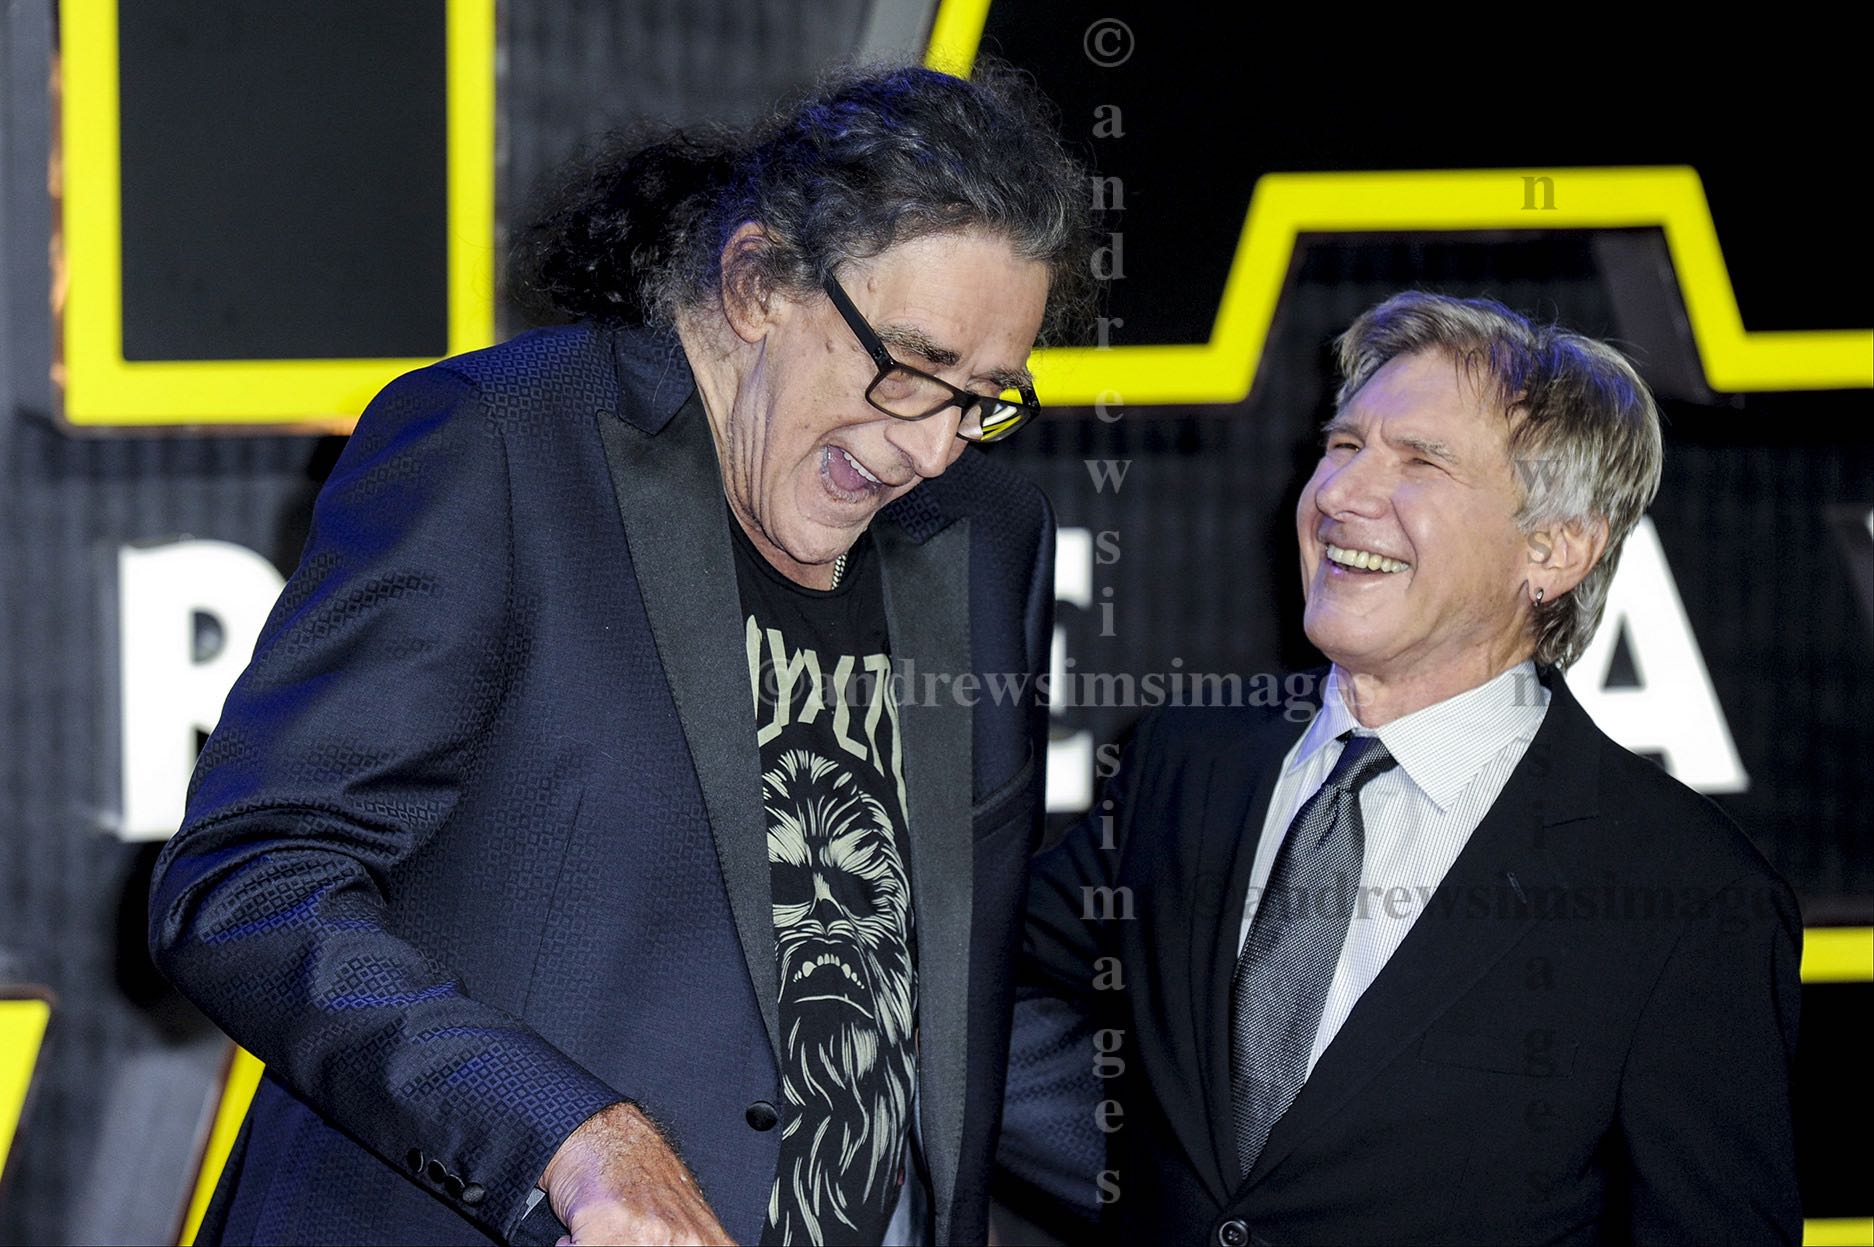 Peter Mayhew and Harrison Ford Star Wars The Force Awakens film premiere